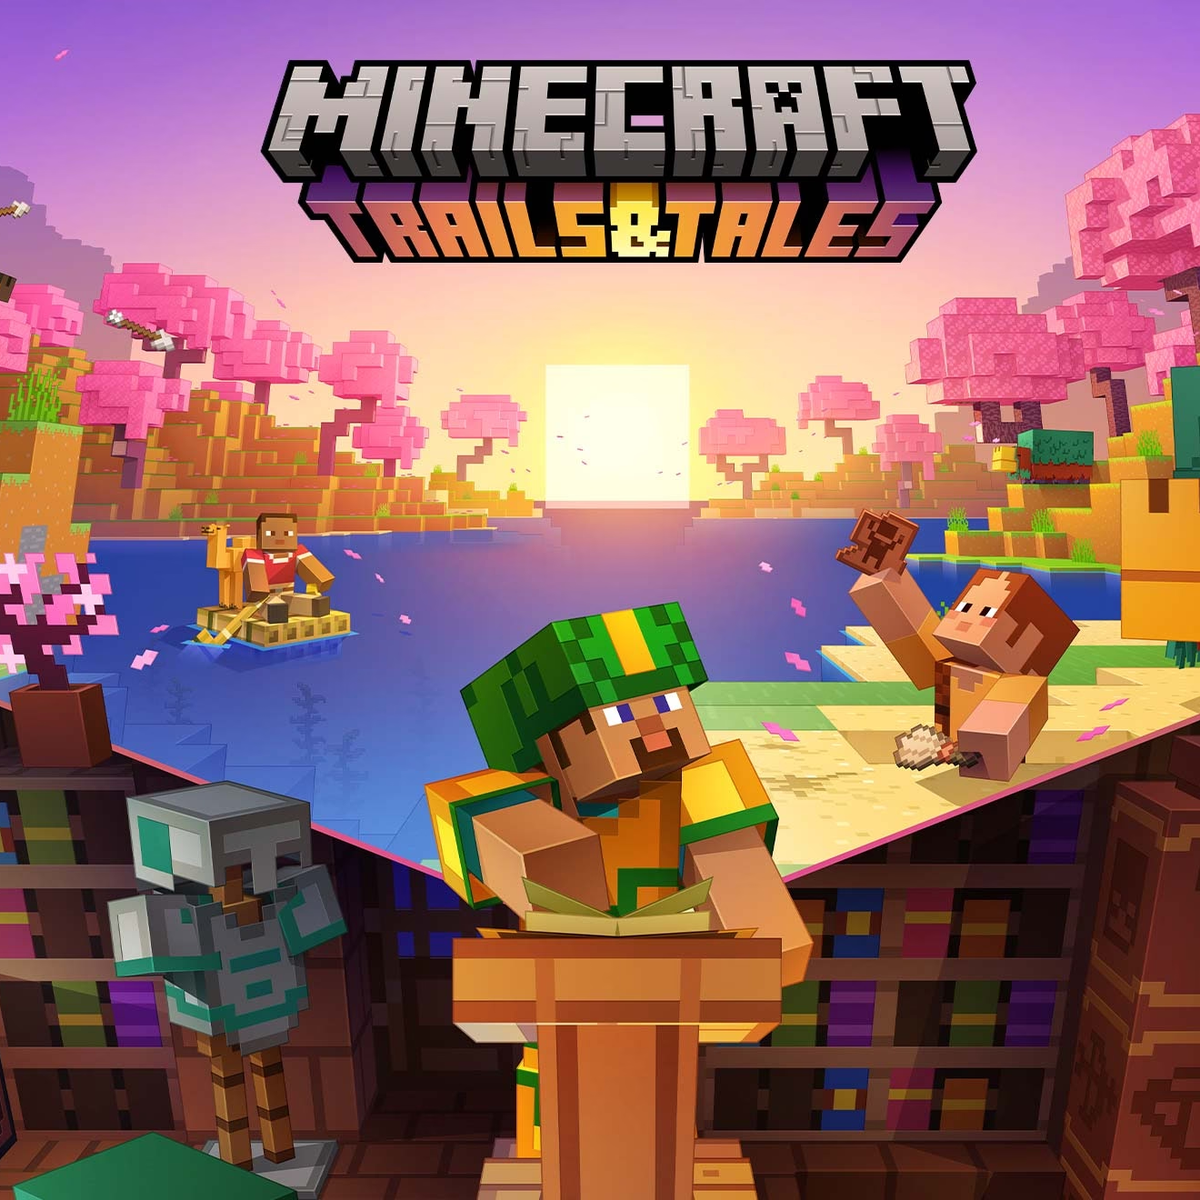 New adventures await in Minecraft with today's launch of the Trails & Tales  update